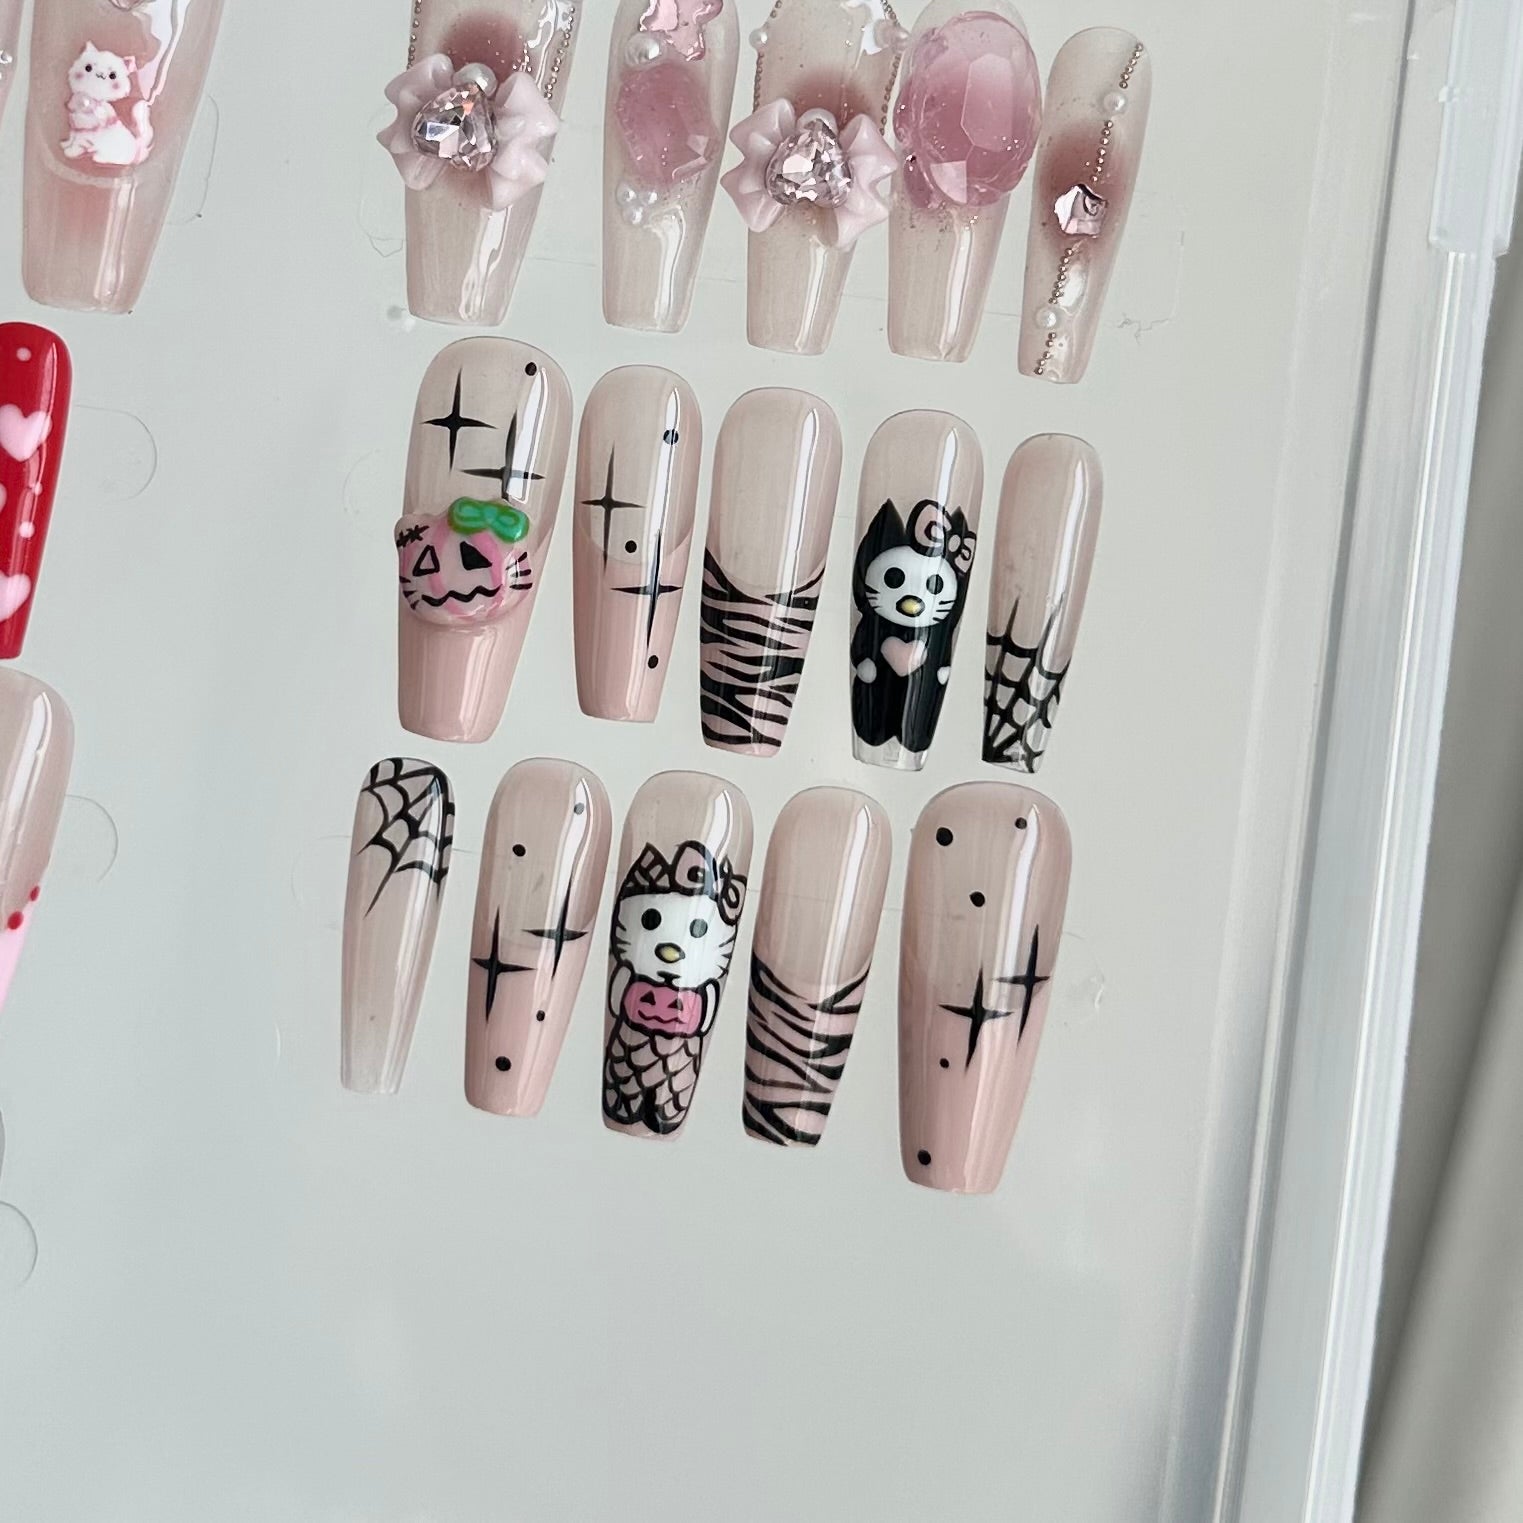 DEVIL KITTY - TEN PIECES OF HANDCRAFTED PRESS ON NAIL